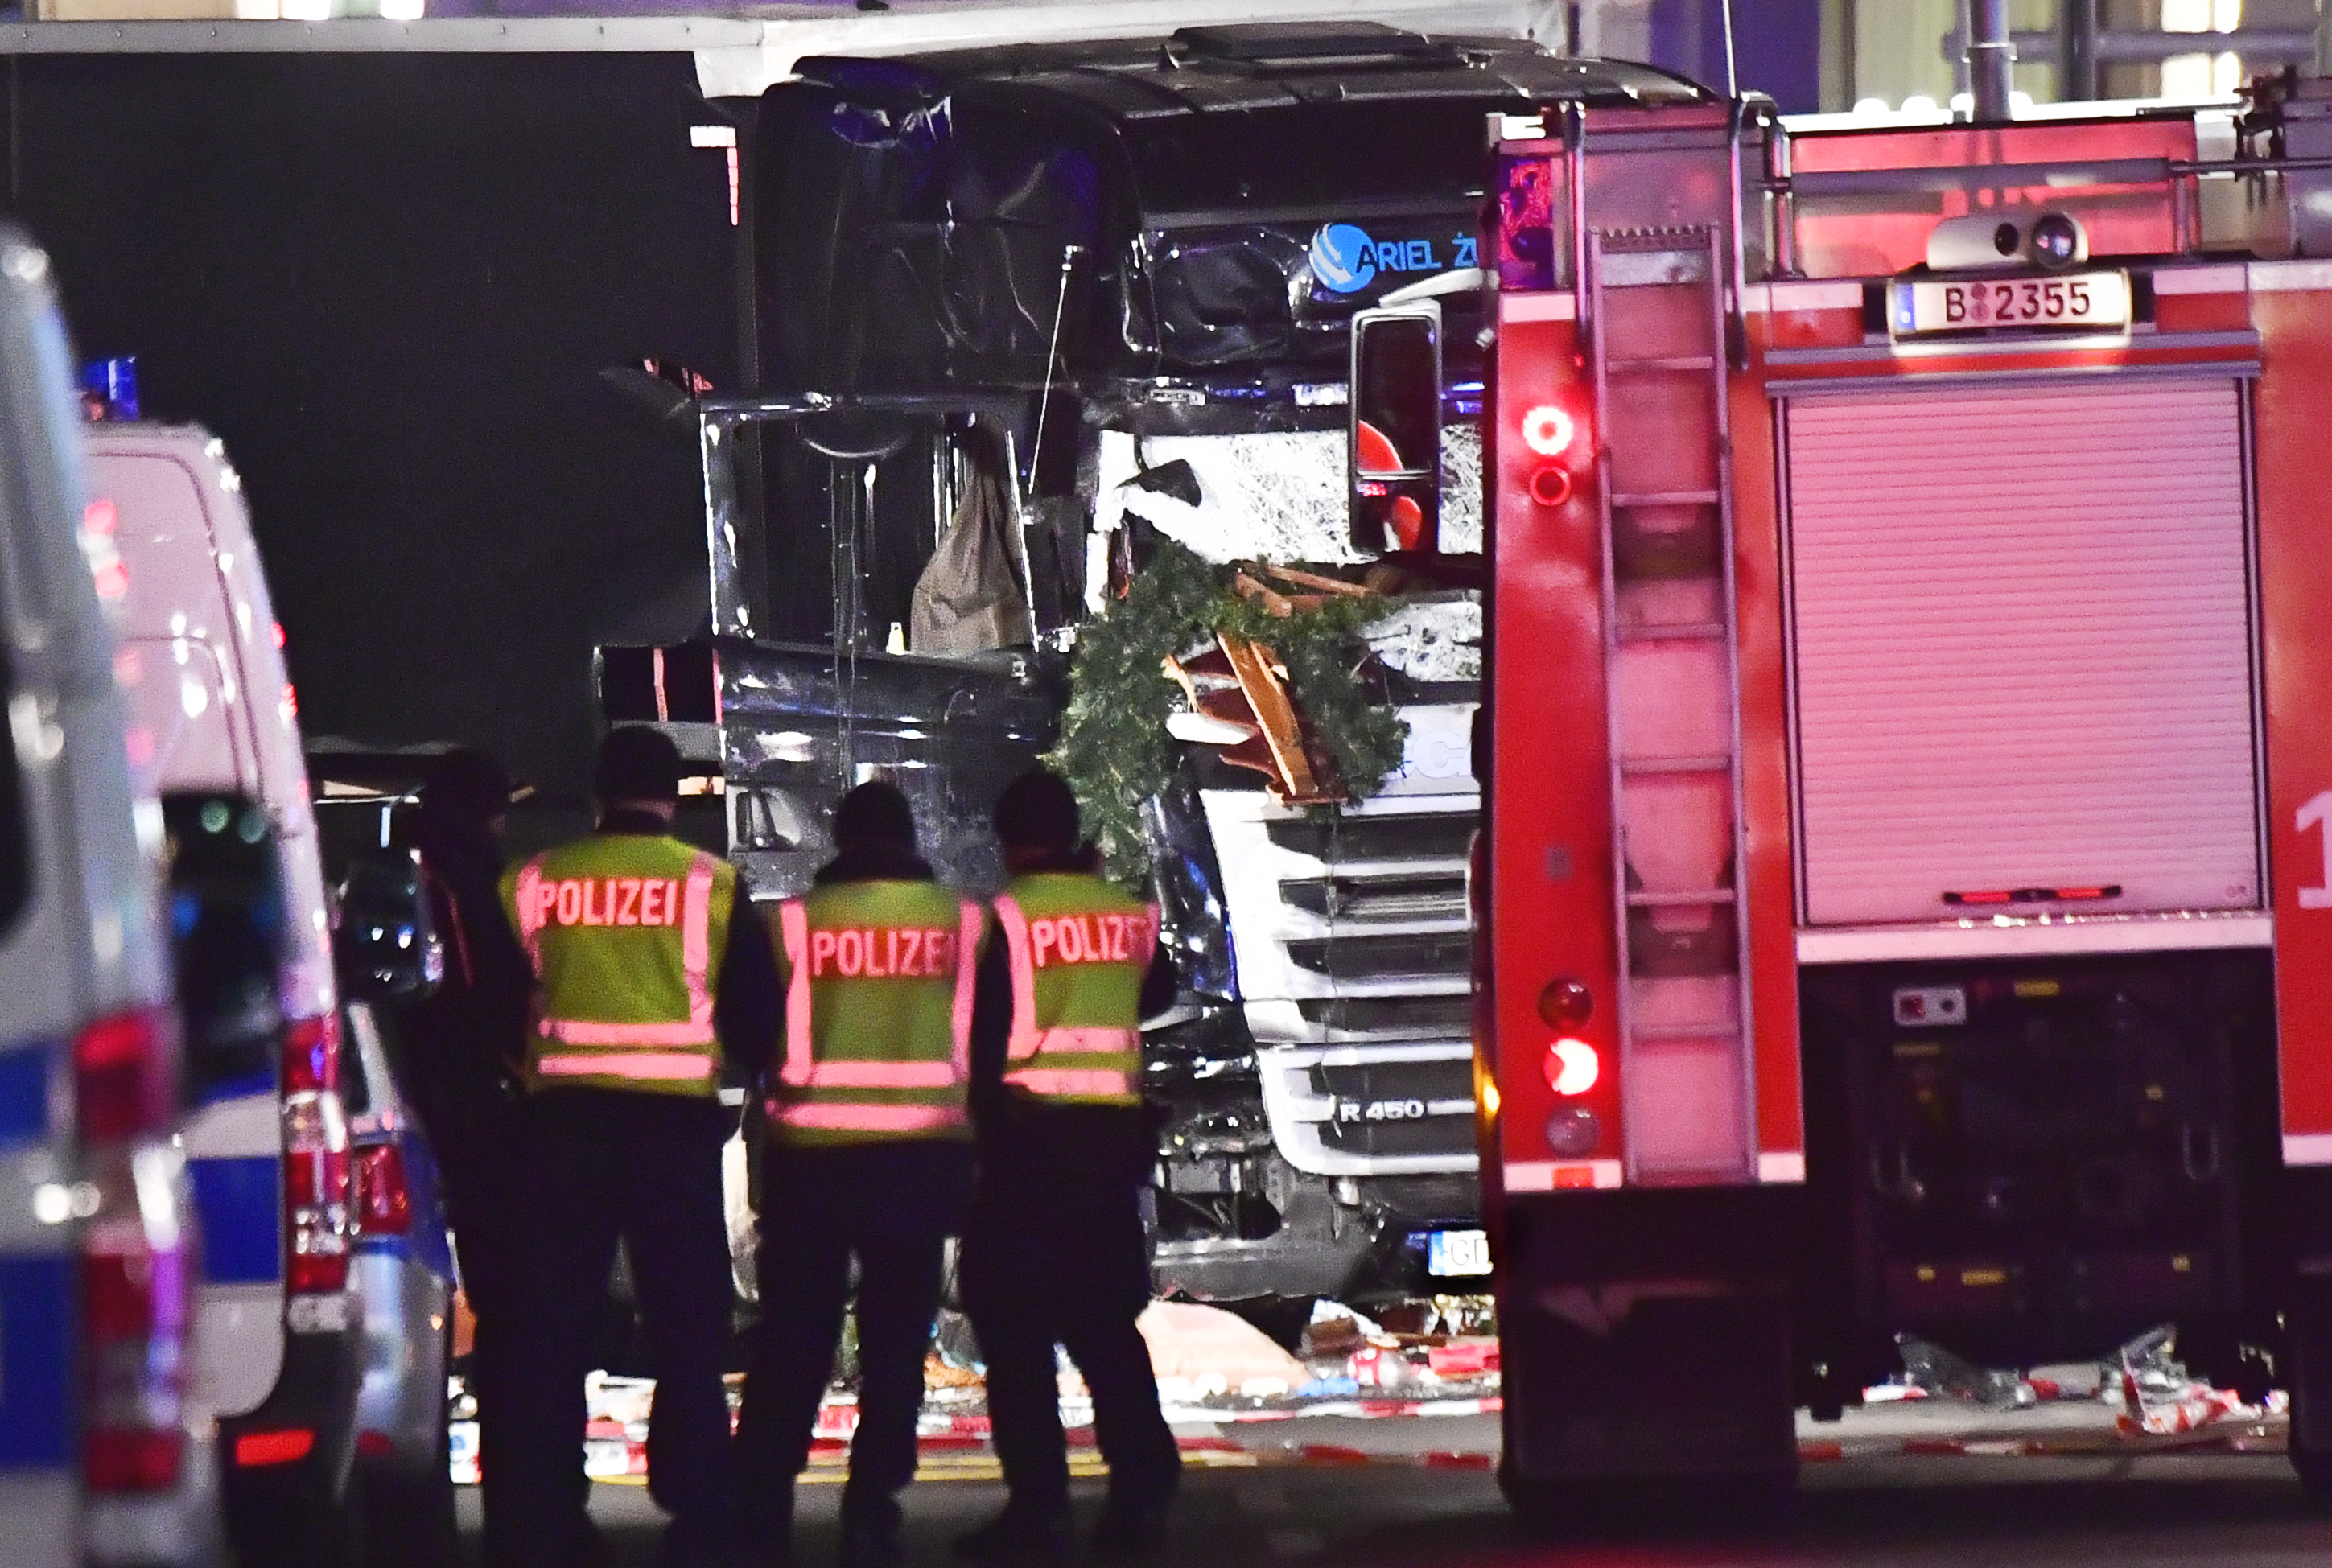 Police officers inspect the truck that crashed into a christmas market at Gedächniskirche church in Berlin, on December 19, 2016 killing at least nine people and injuring at least 50 people. Ambulances and heavily armed officers rushed to the area after the driver drove up the pavement of the market in a square popular with tourists, in scenes reminiscent of the deadly truck attack in the French city of Nice in July. / AFP PHOTO / John MACDOUGALL